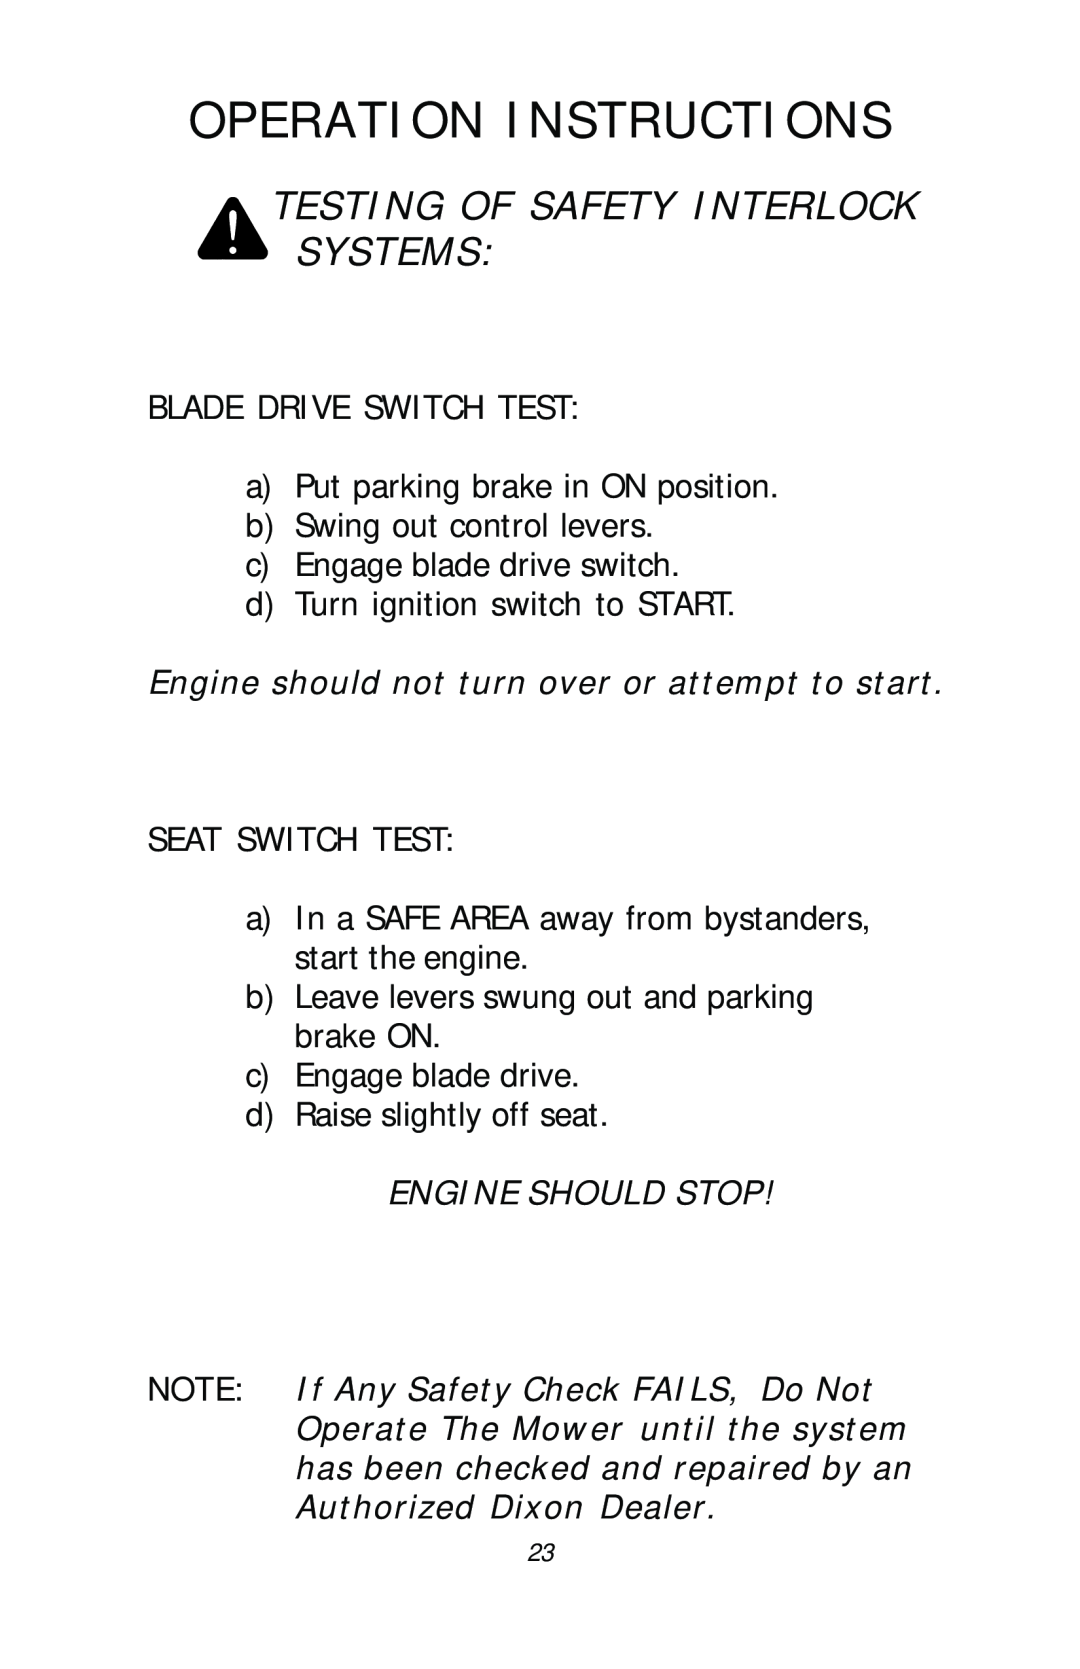 Dixon 17411-1103, ZTR RAM 50 manual Operation Instructions, Testing Of Safety Interlock Systems, Engine Should Stop 